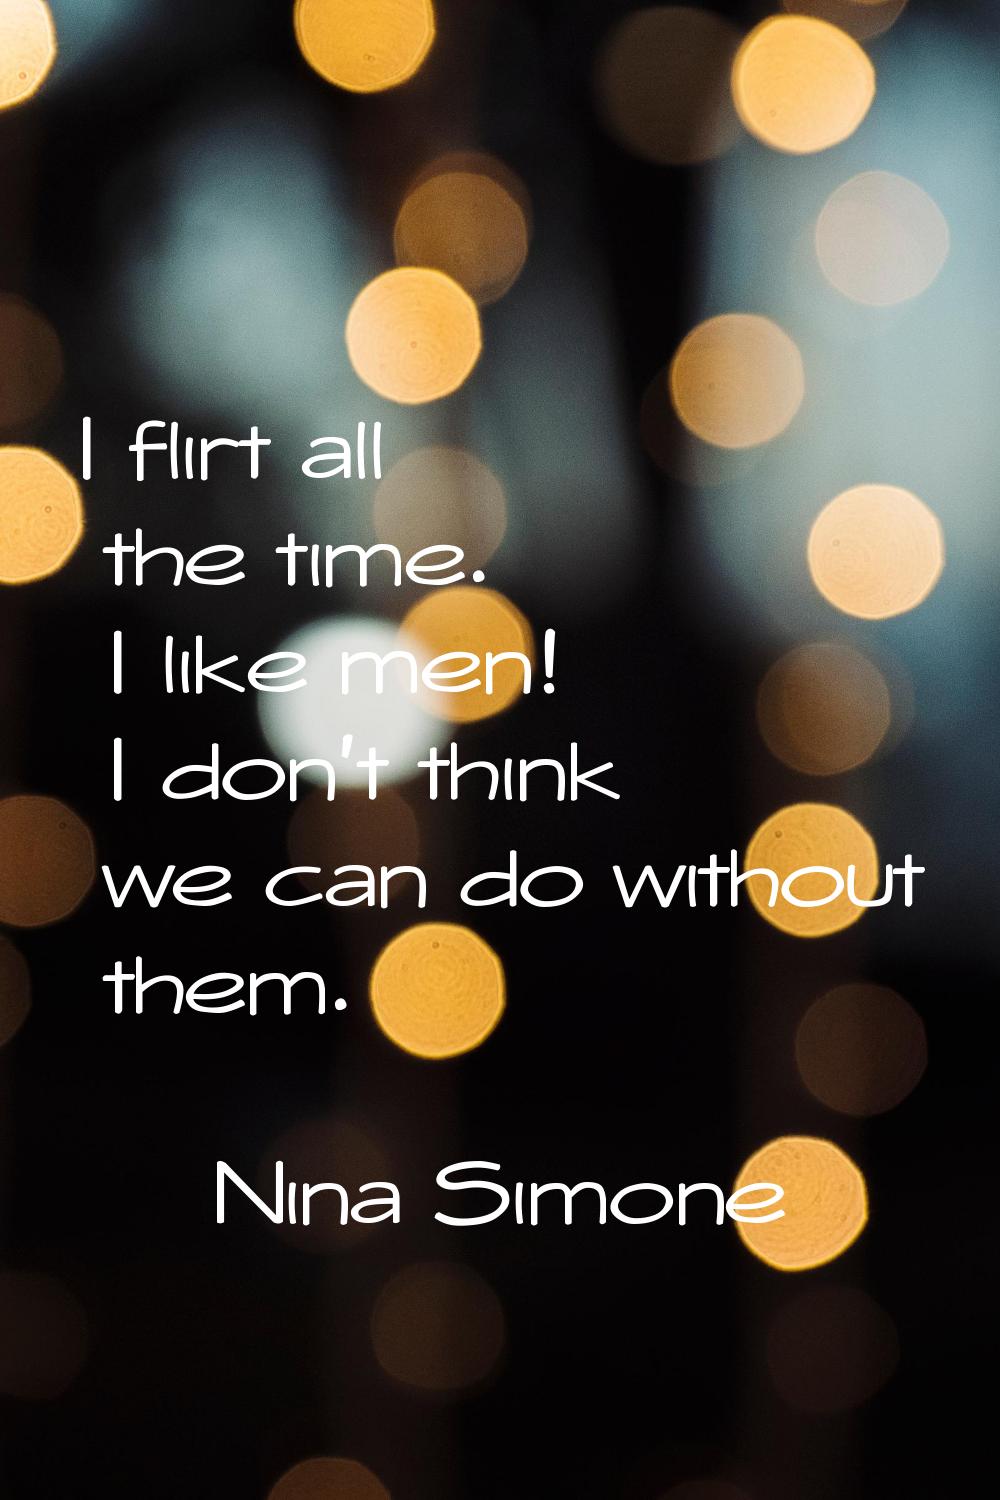 I flirt all the time. I like men! I don't think we can do without them.